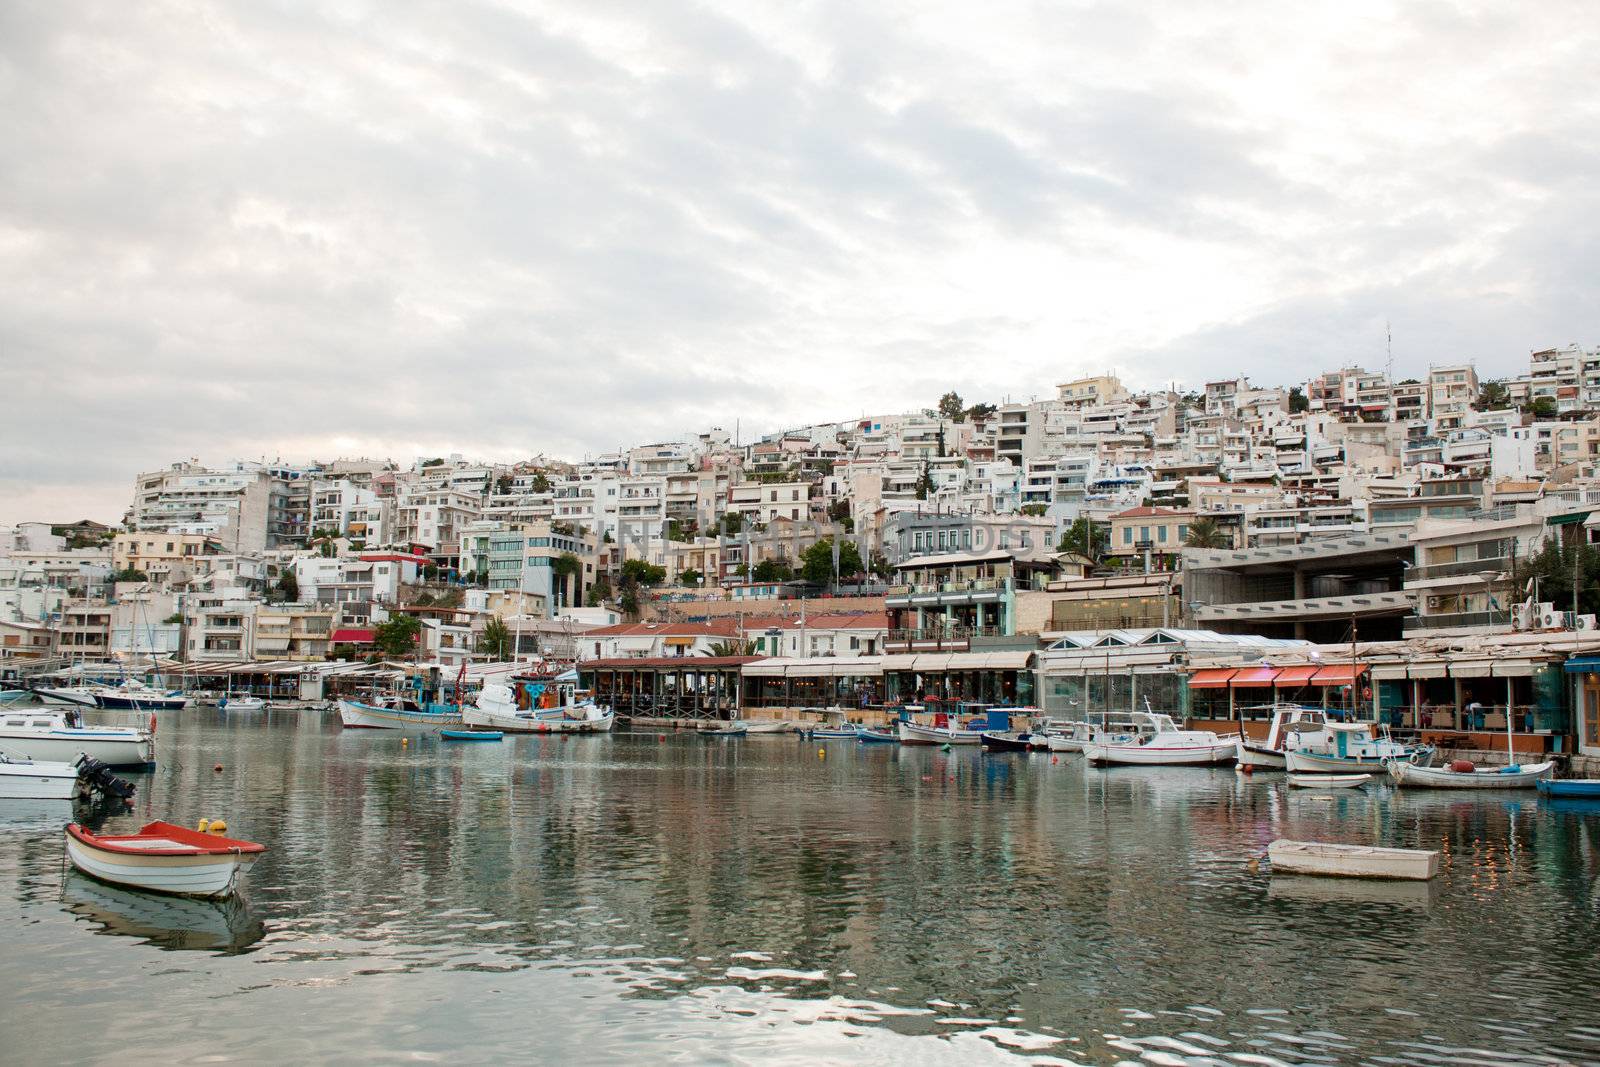 View of Mikrolimano Port in Piraeus, near Athens, Greece, at sunset.